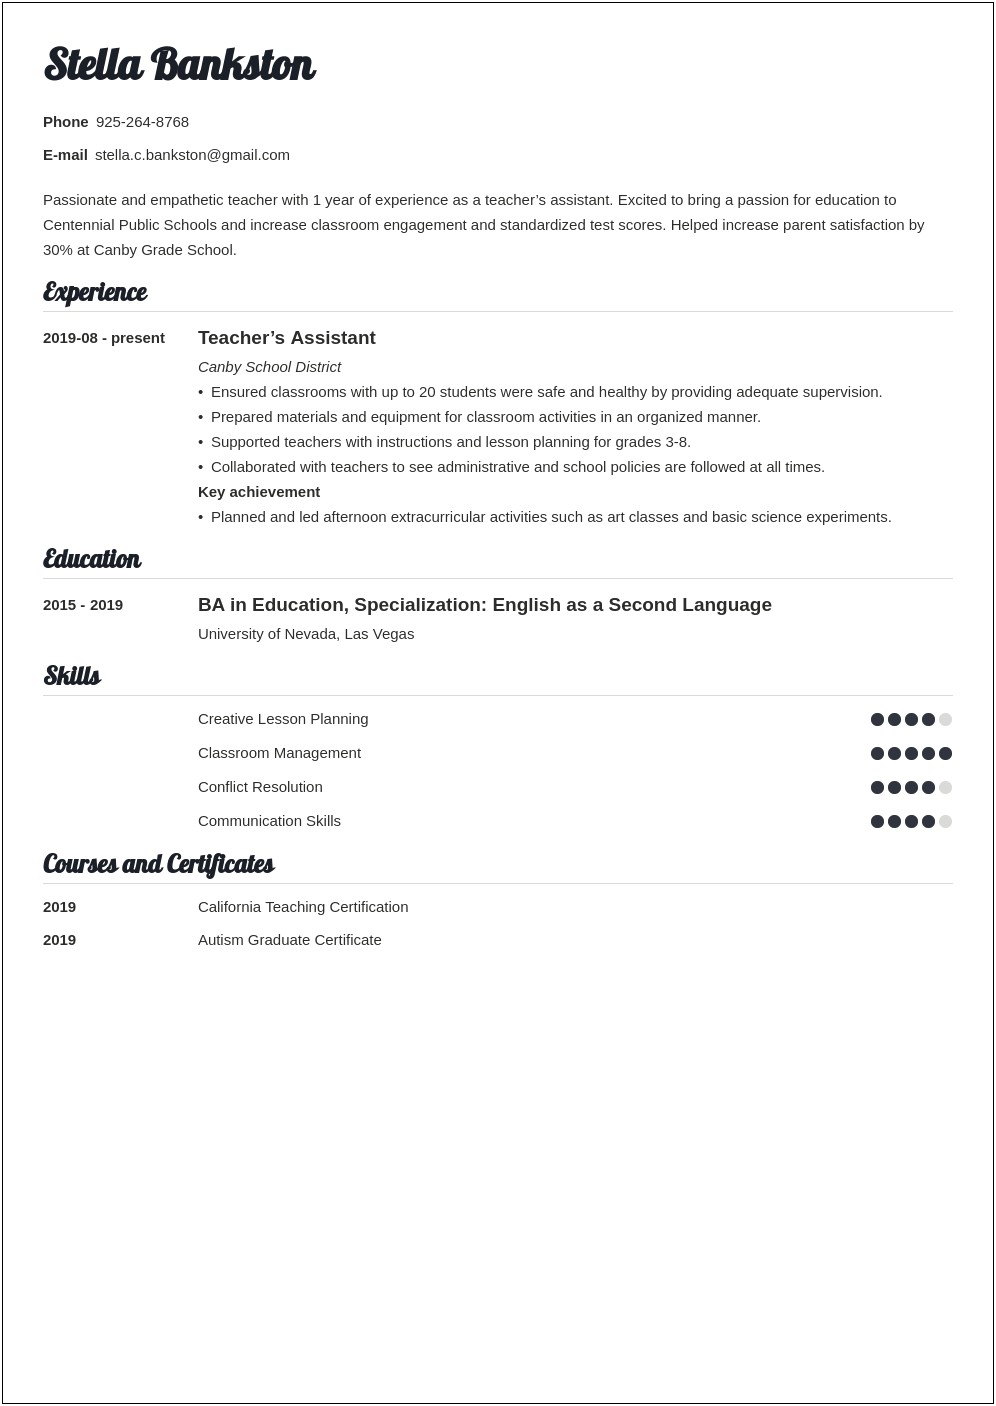 Resume Samples For Teachers With No Experience Pdf